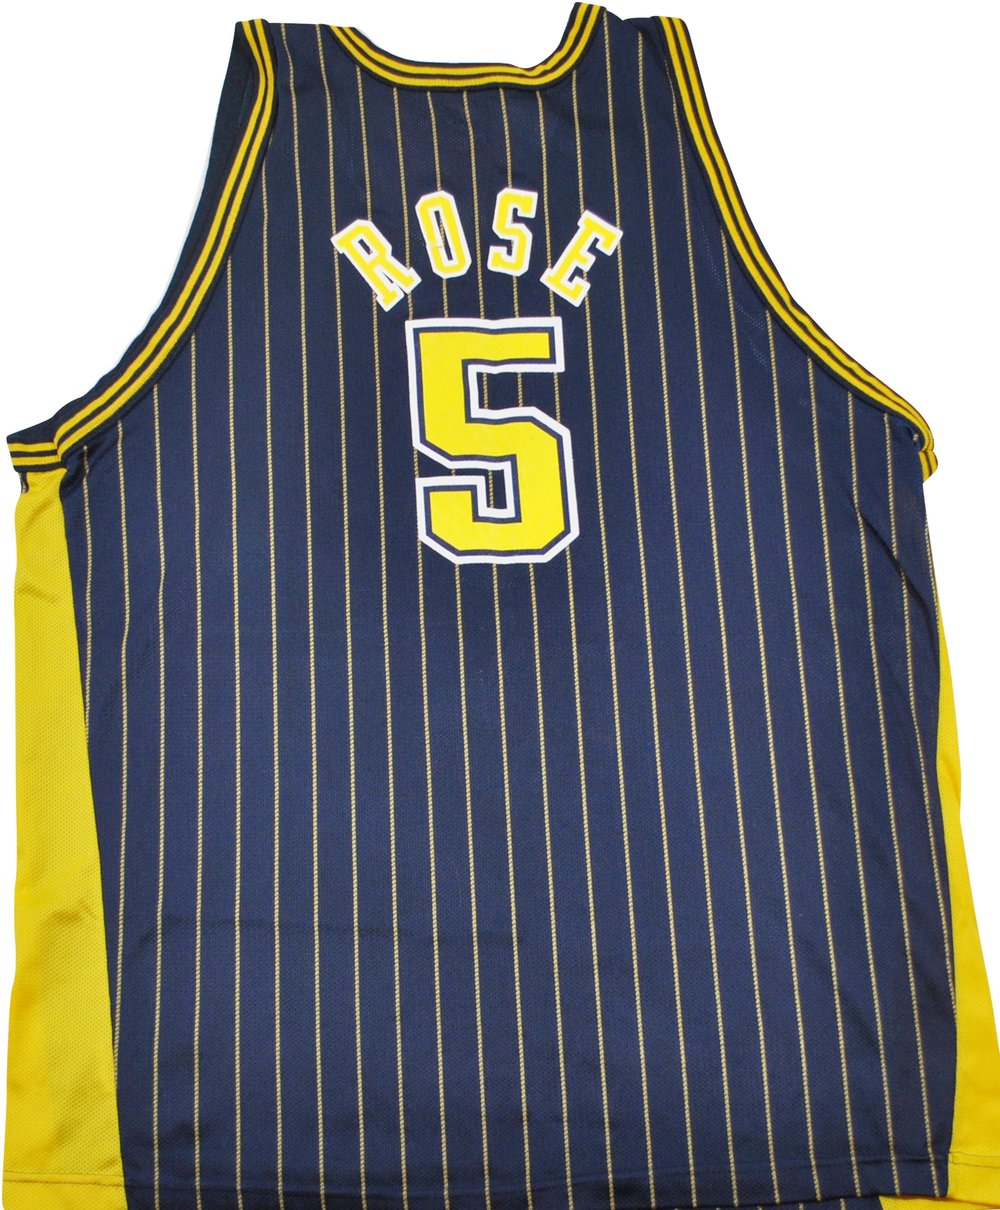 Pacers adult sizes jersey